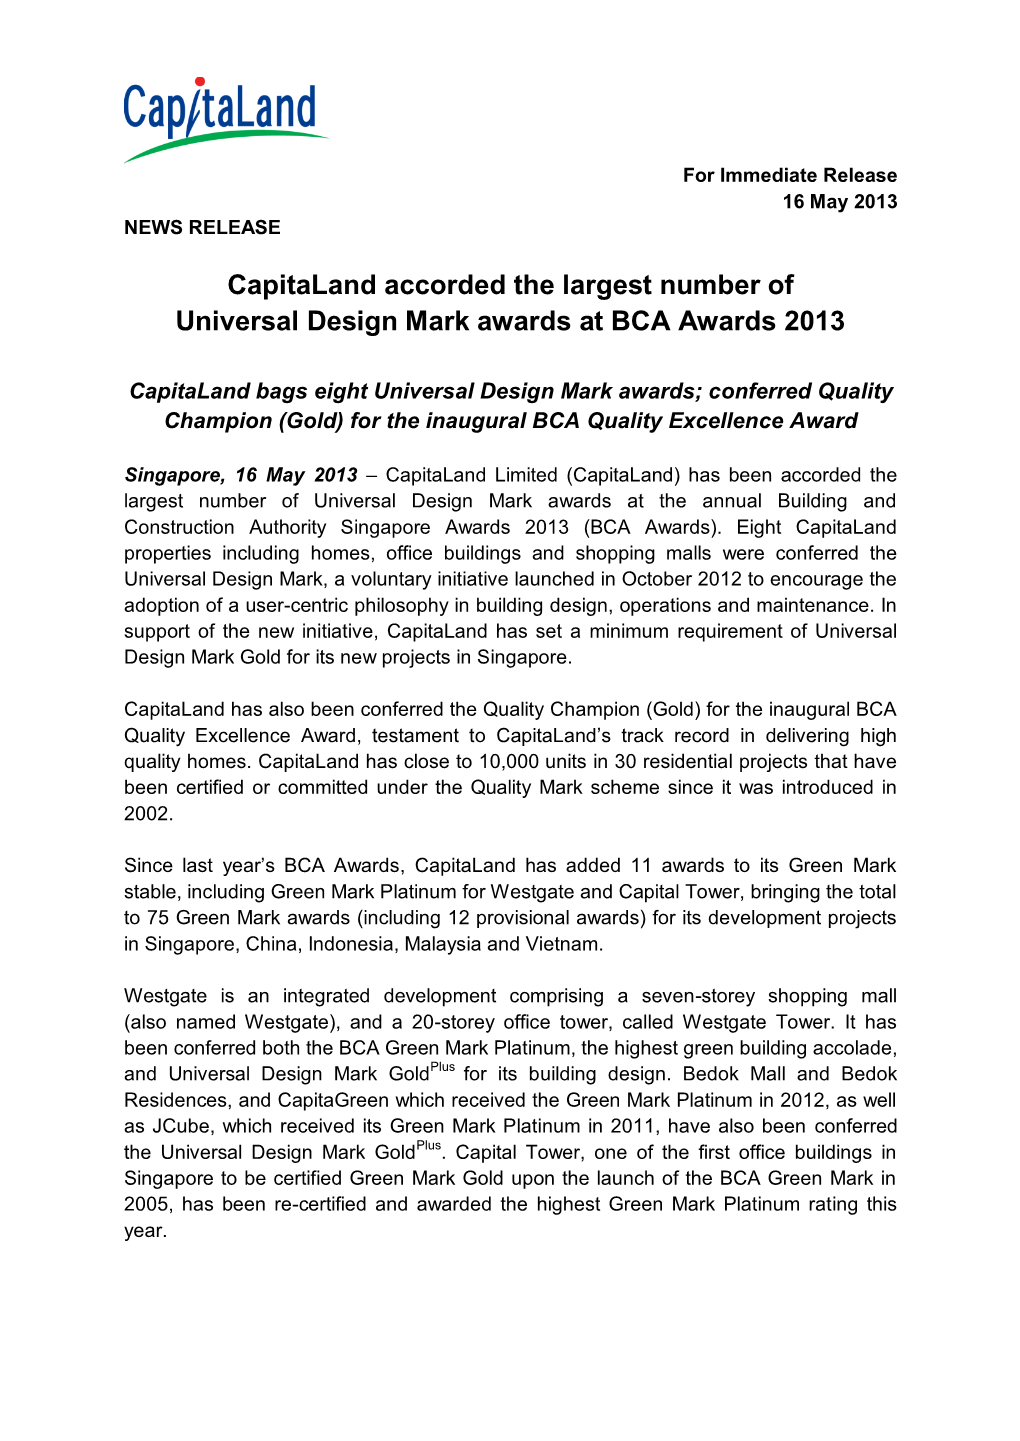 Capitaland Bags Eight Universal Design Mark Awards; Conferred Quality Champion (Gold) for the Inaugural BCA Quality Excellence Award